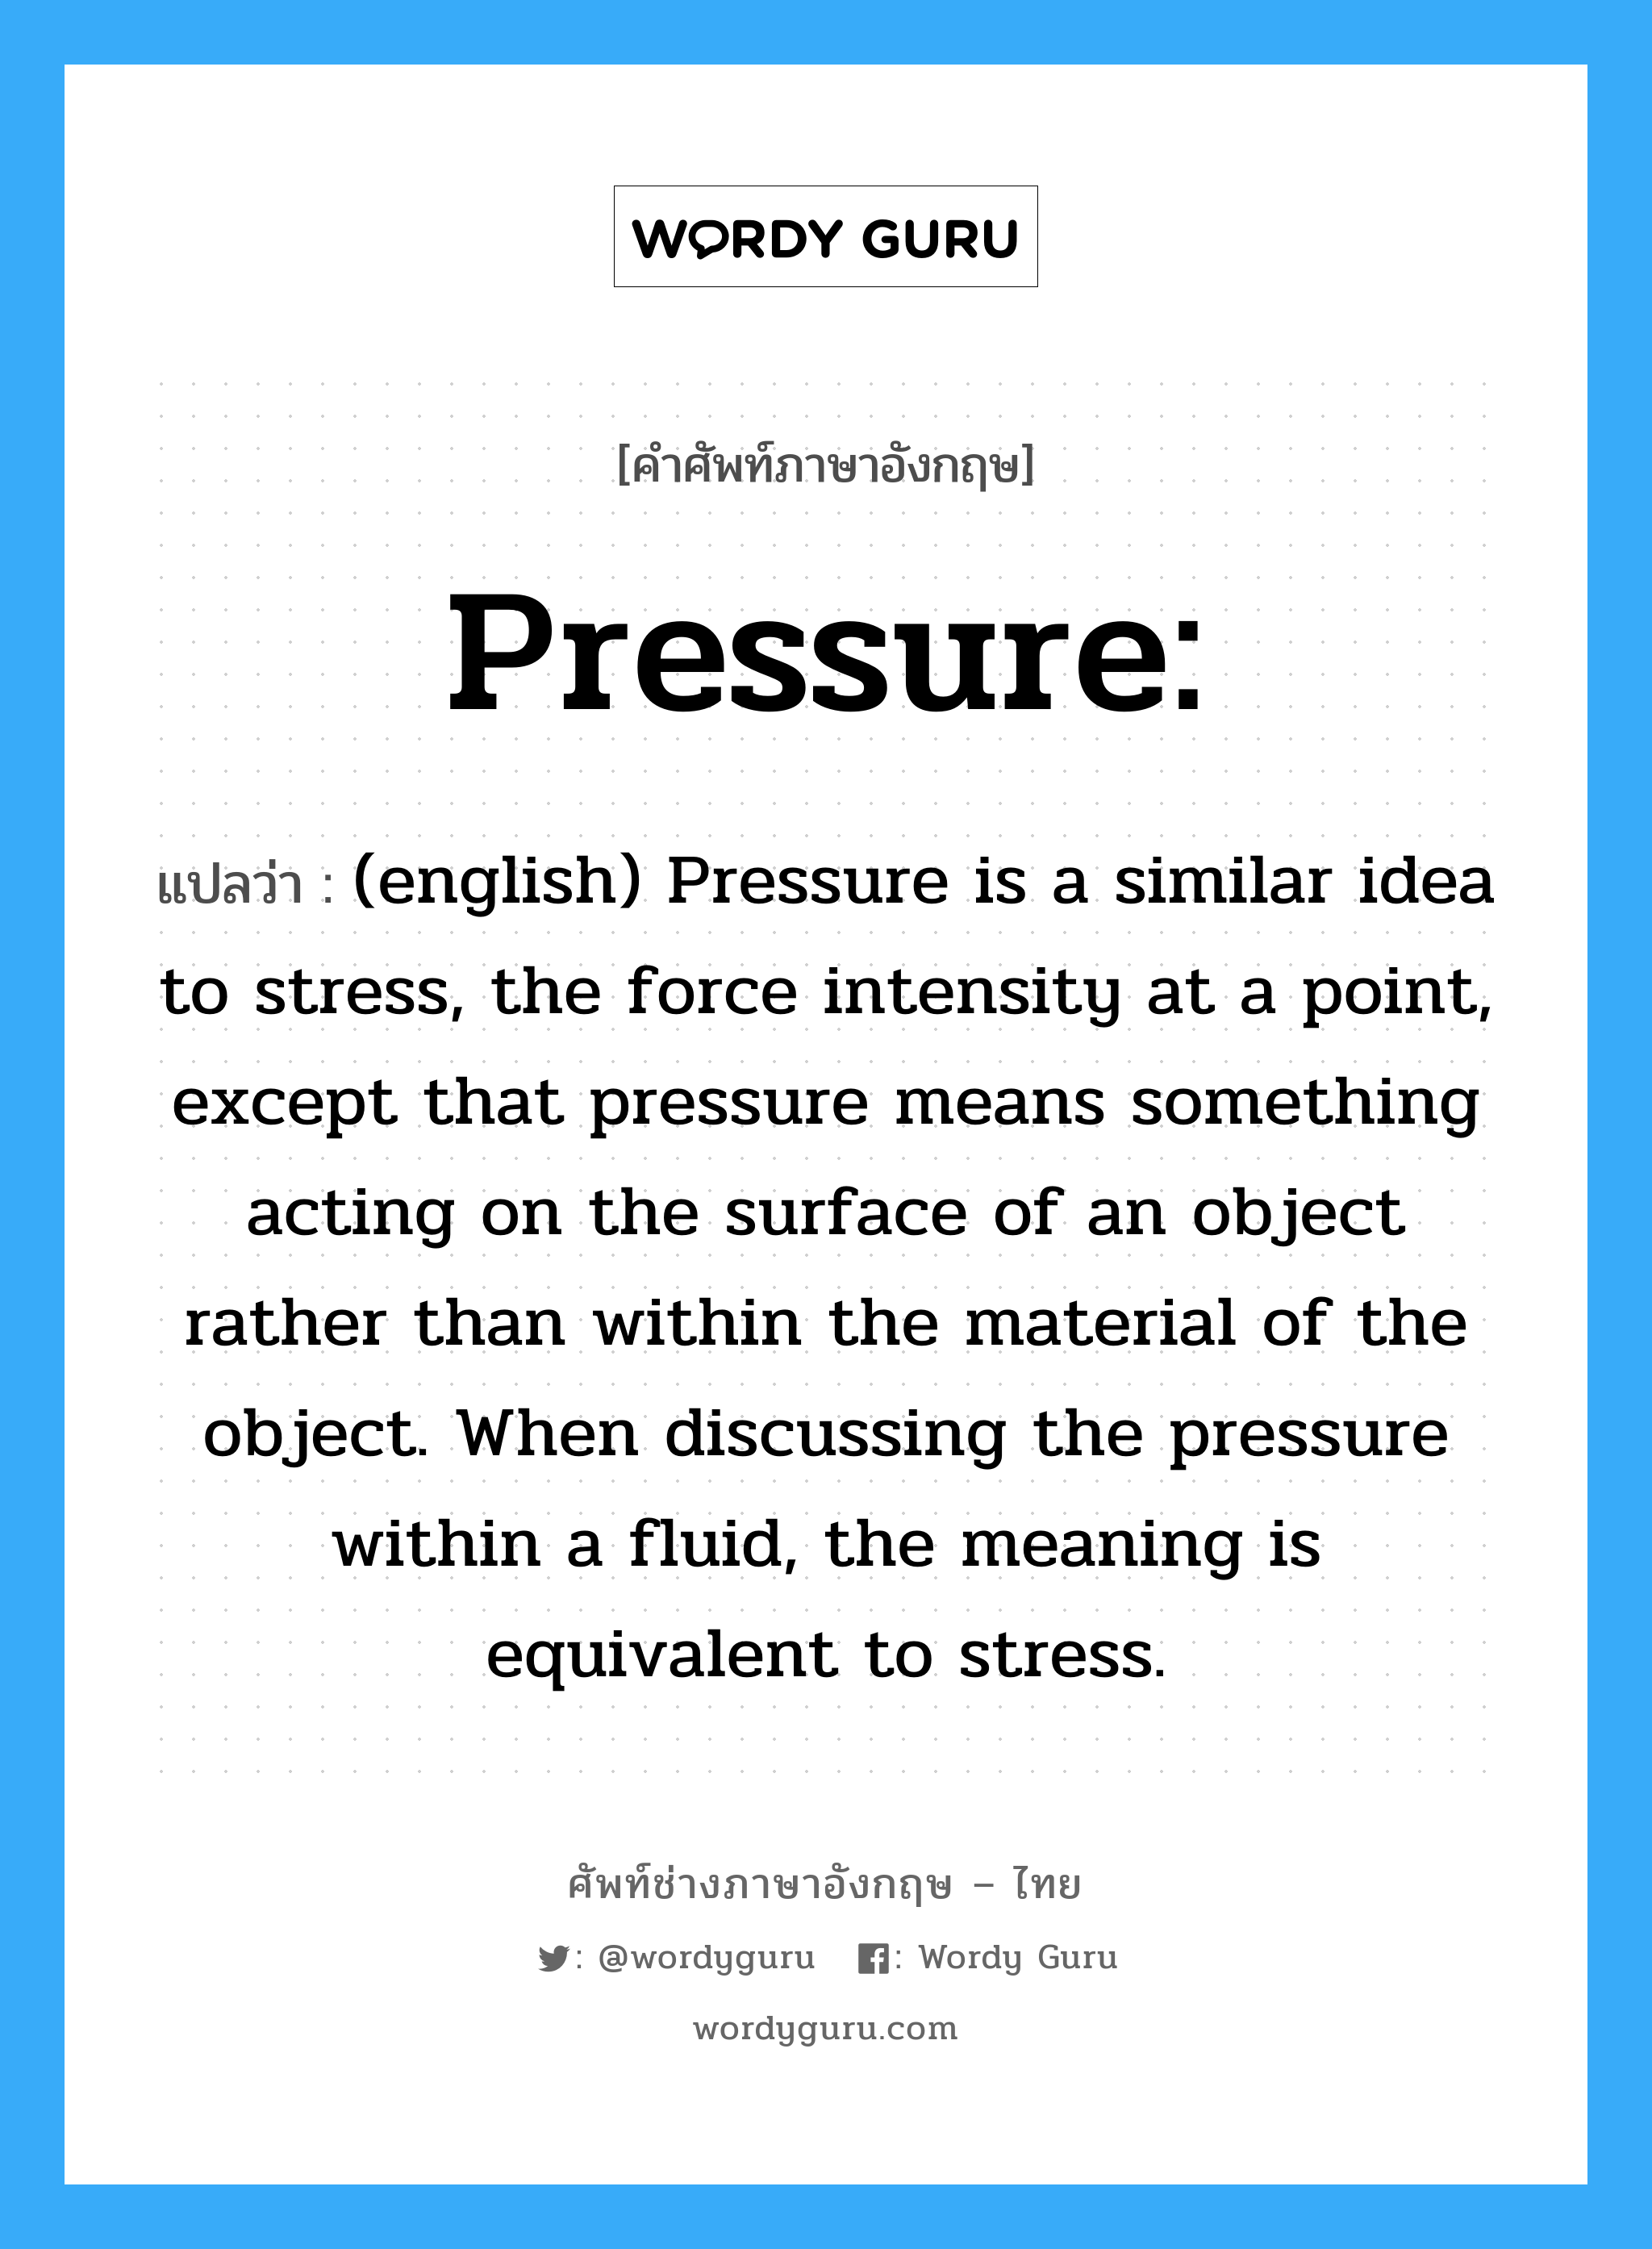 Pressure: แปลว่า?, คำศัพท์ช่างภาษาอังกฤษ - ไทย Pressure: คำศัพท์ภาษาอังกฤษ Pressure: แปลว่า (english) Pressure is a similar idea to stress, the force intensity at a point, except that pressure means something acting on the surface of an object rather than within the material of the object. When discussing the pressure within a fluid, the meaning is equivalent to stress.